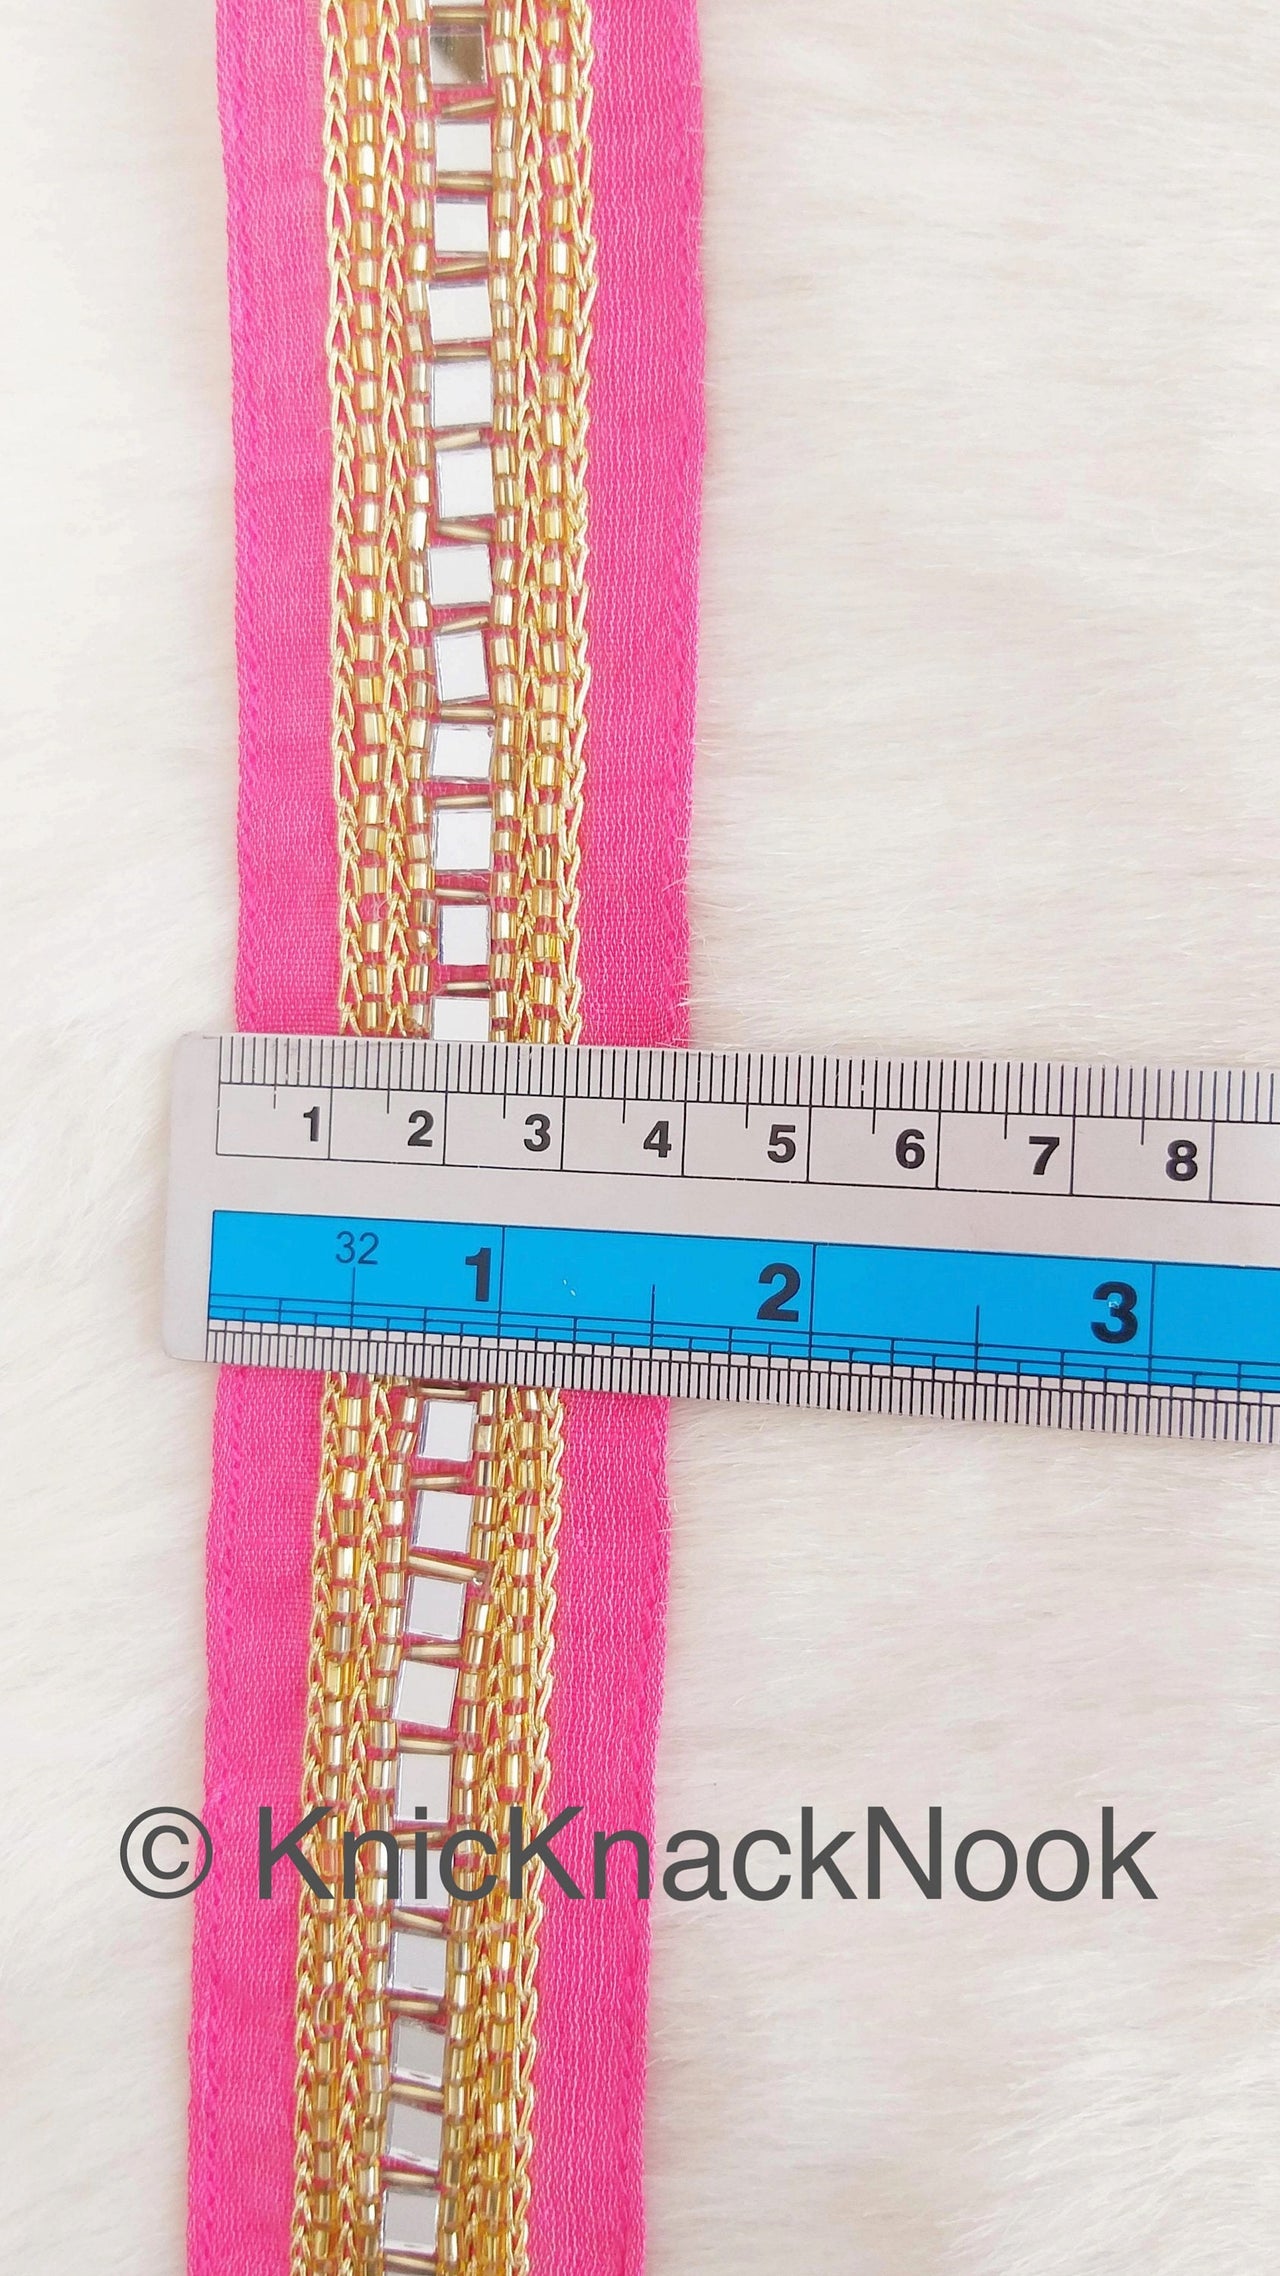 Pink Fabric Trim With Mirrors Embellishments, Gold Beads and Gold Embroidery, Approx. 40mm Wide